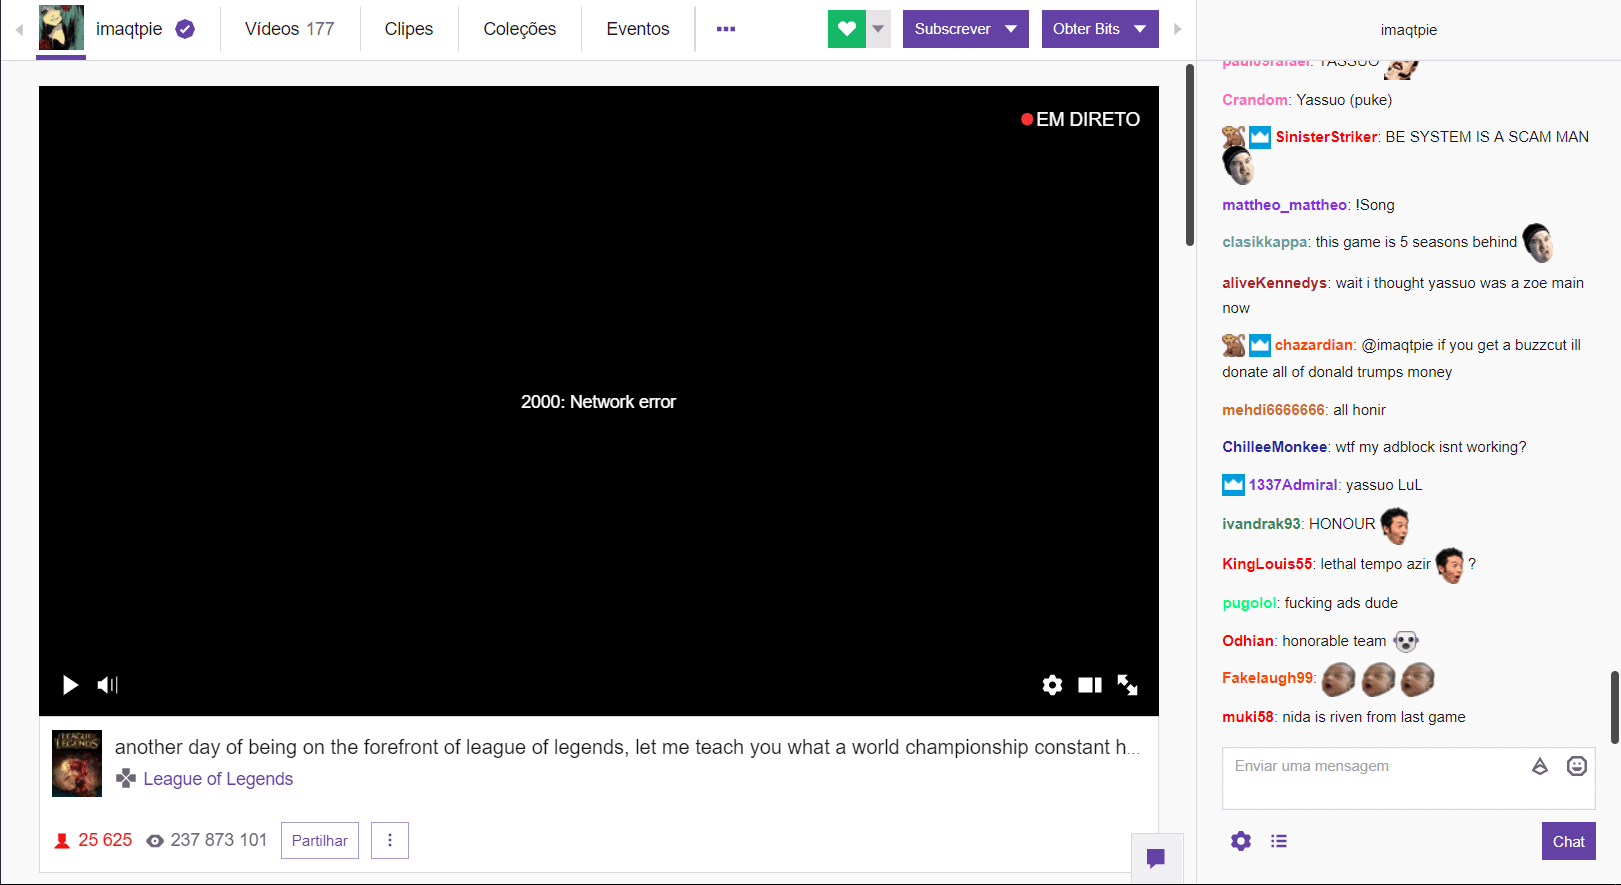 Twitch Error 2000 occurs due to a Network error, usually on the users' end.